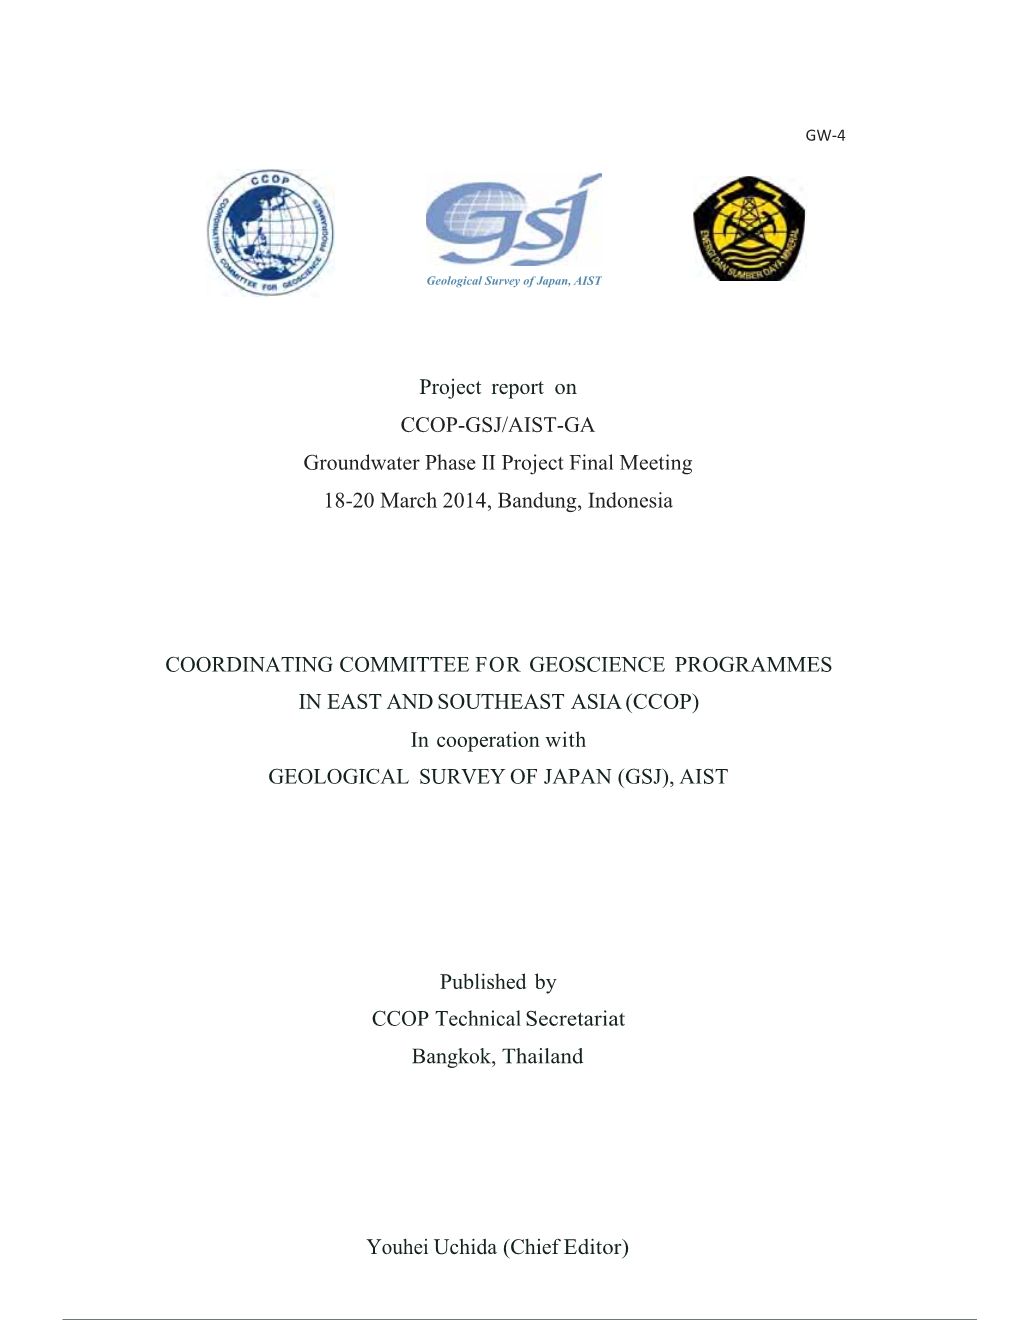 Project Report on CCOP-GSJ/AIST-GA Groundwater Phase II Project Final Meeting 18-20 March 2014, Bandung, Indonesia